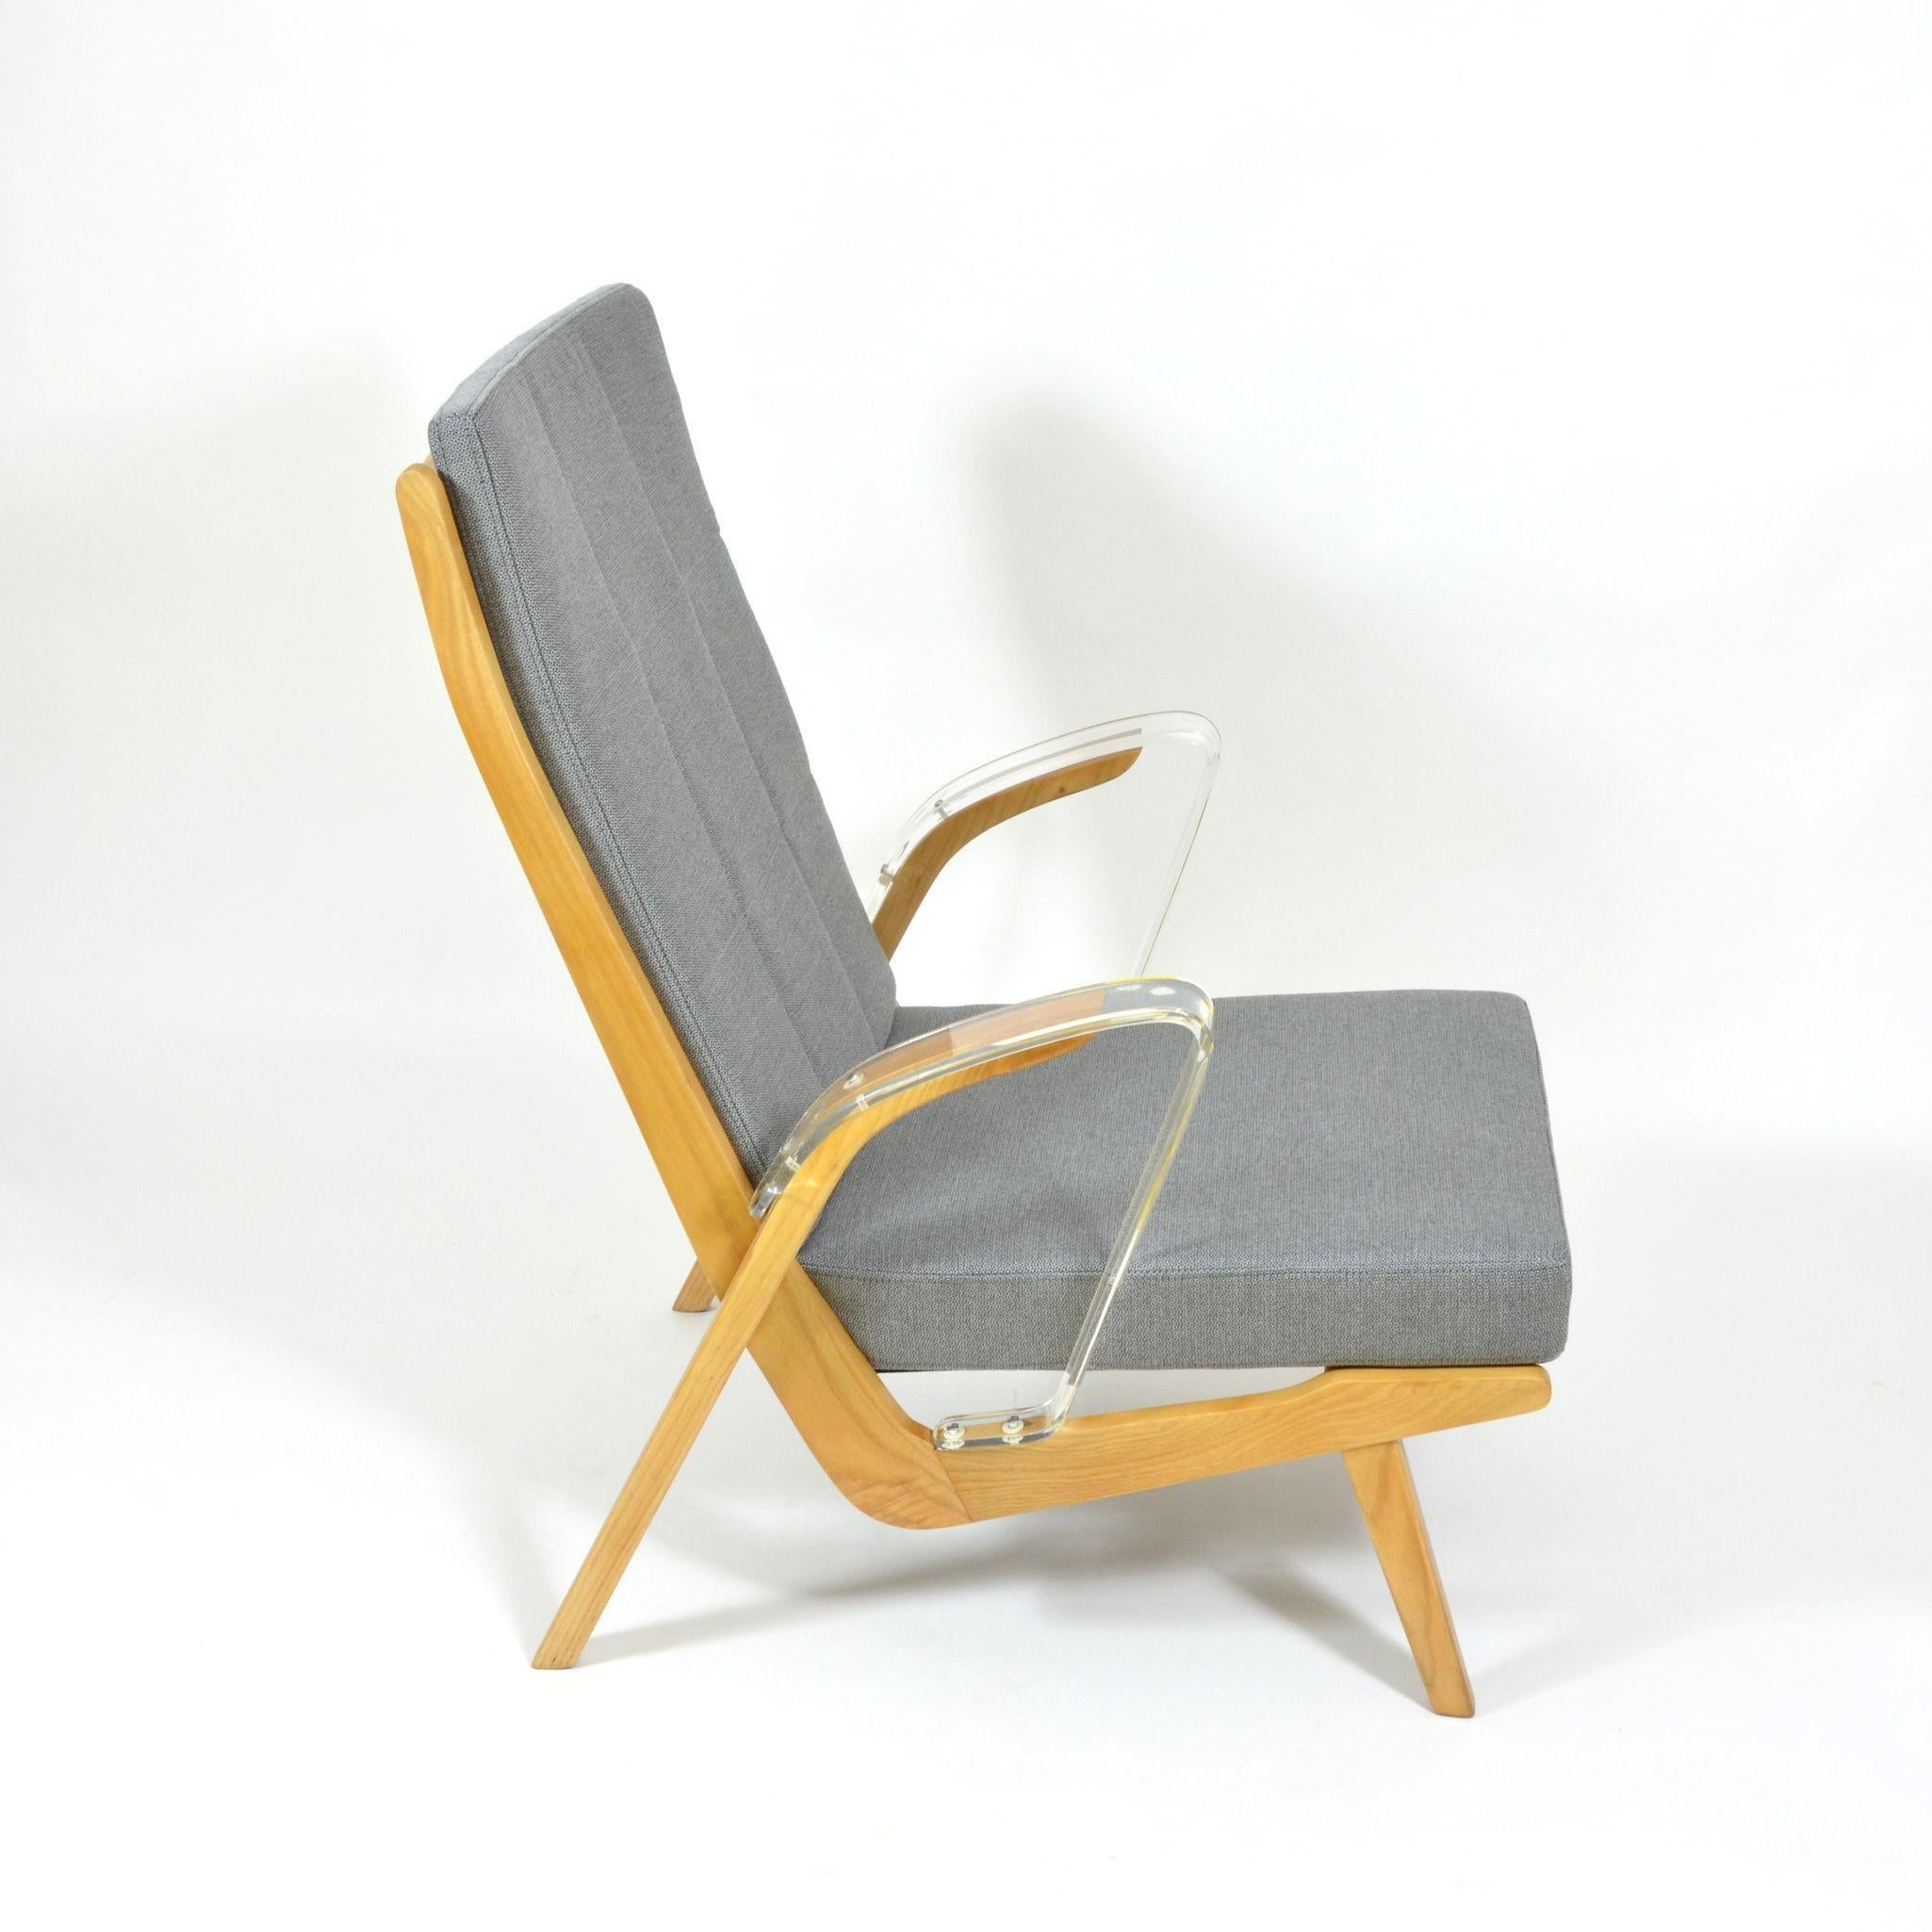 Late 20th Century Unique Retro Armchairs from 1970s with Armrests Made of Plexiglass